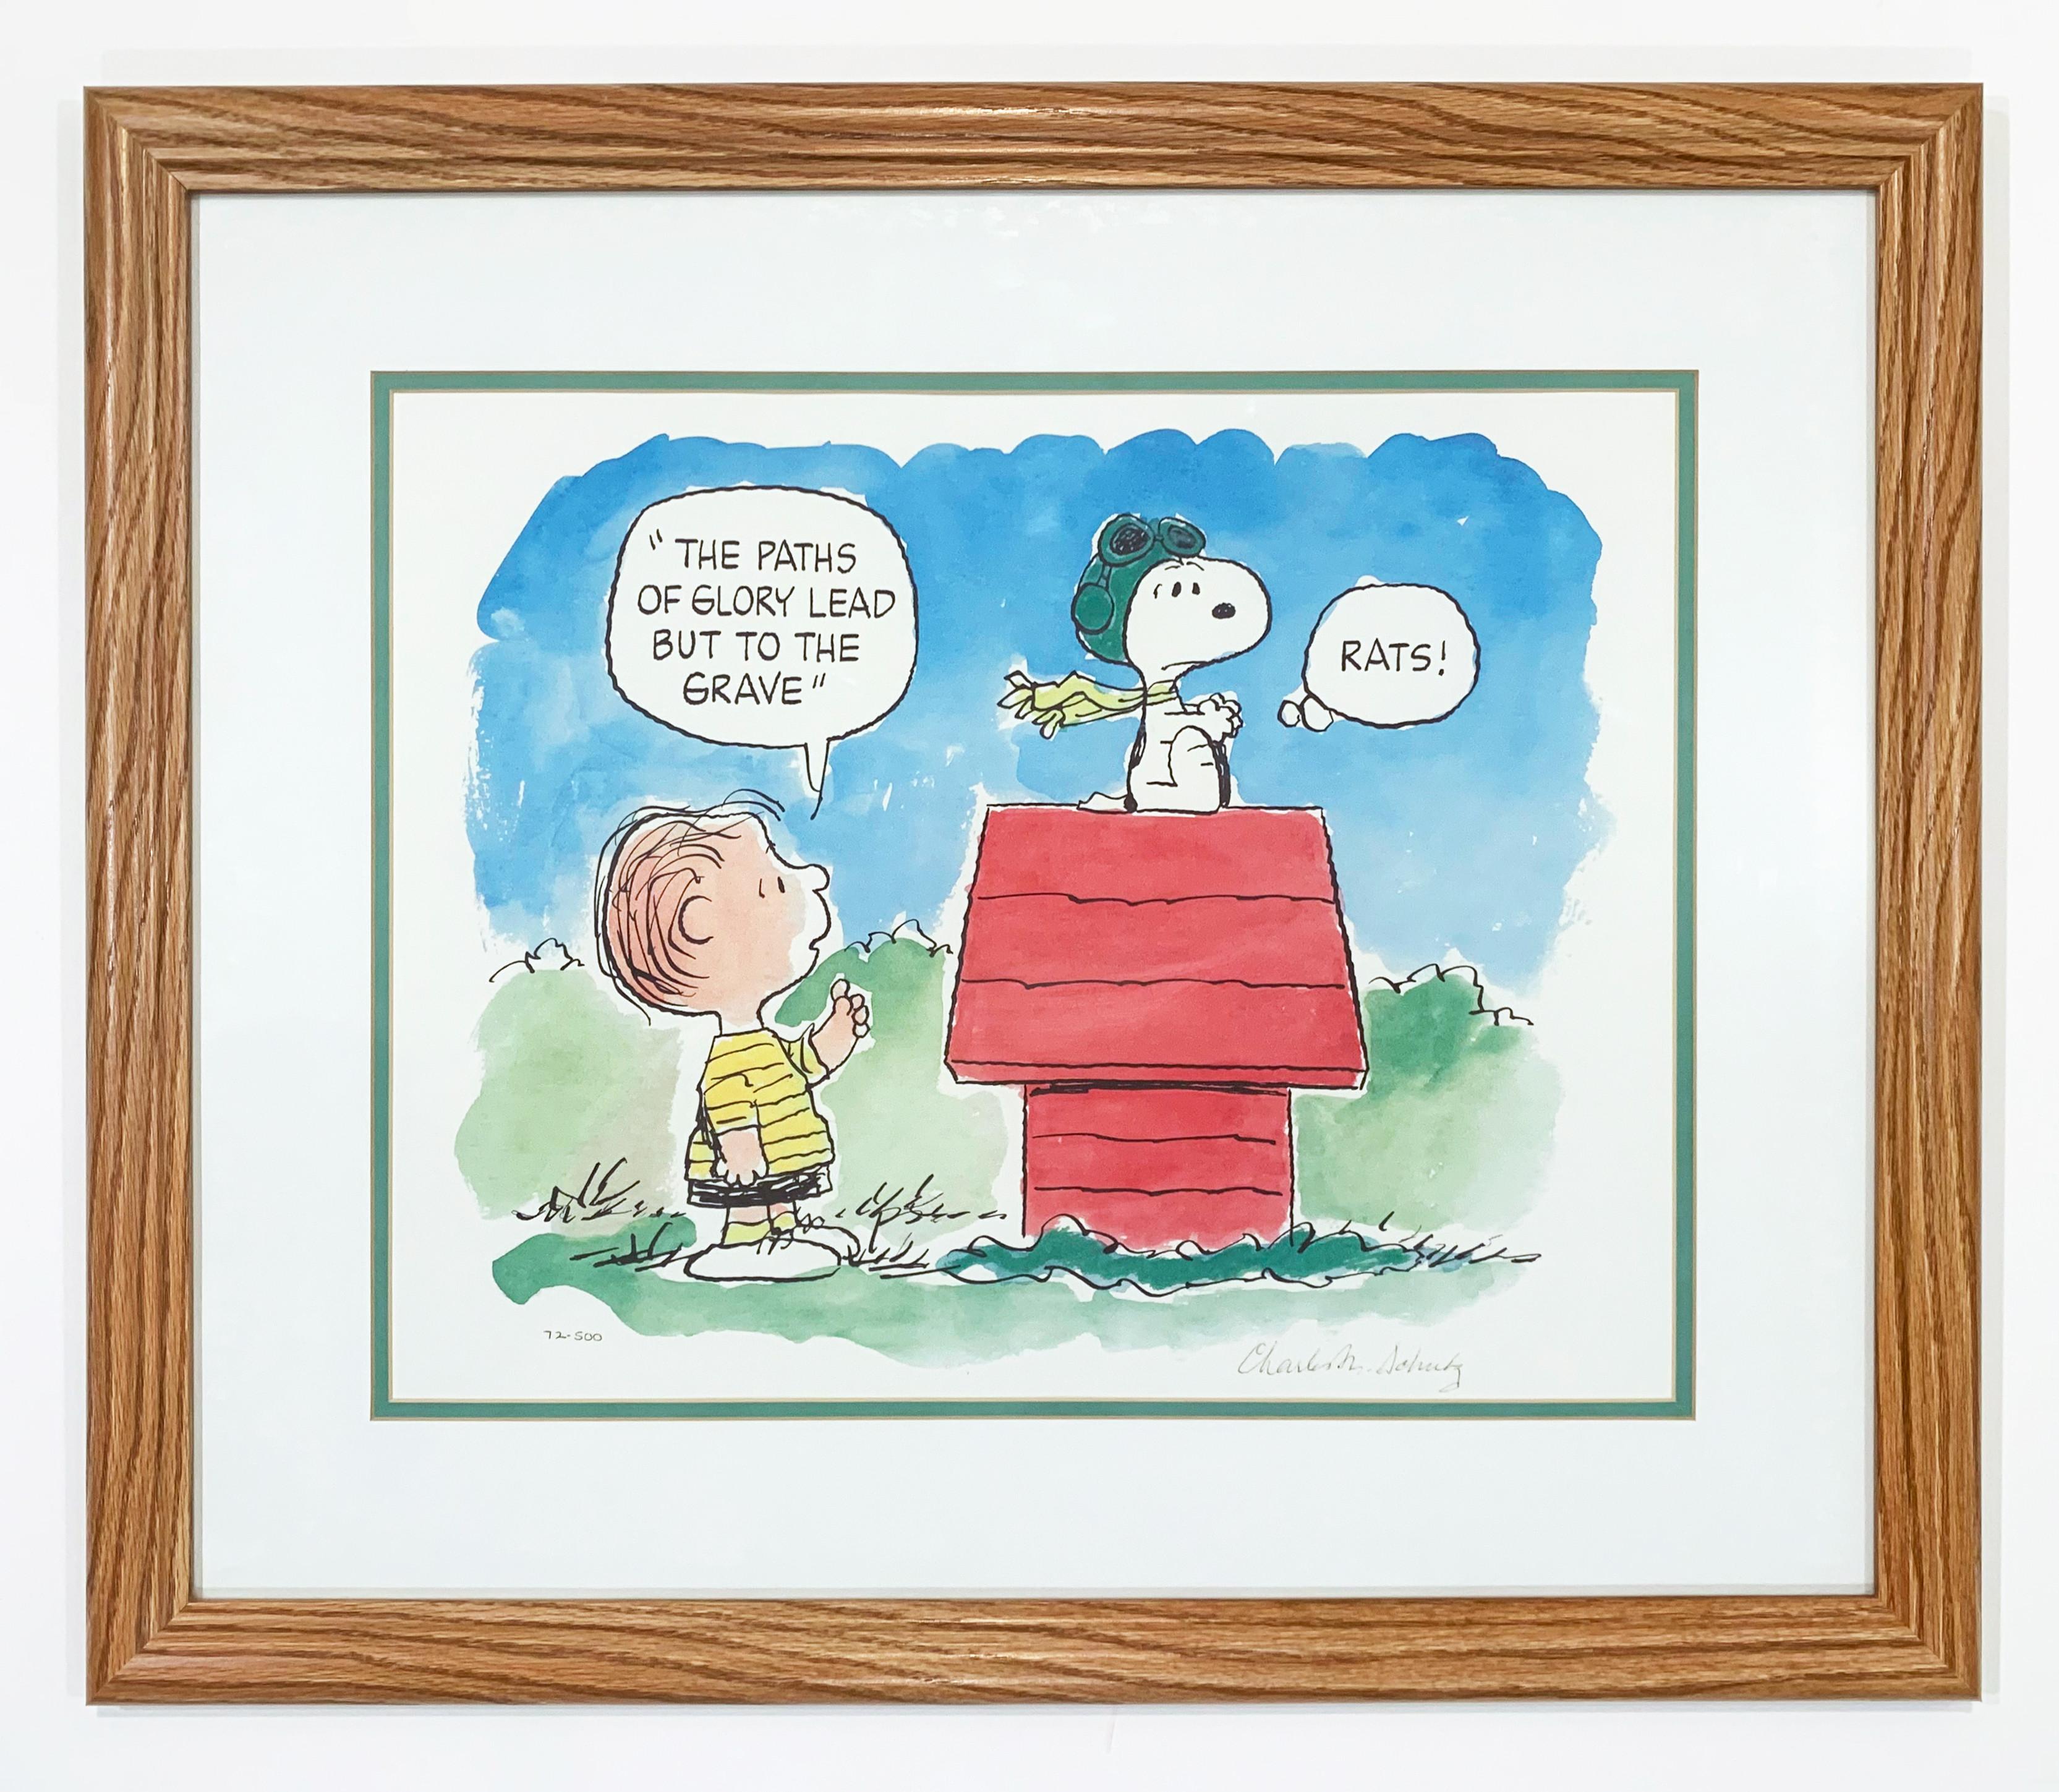 The Flying Ace - Print by Charles Schulz